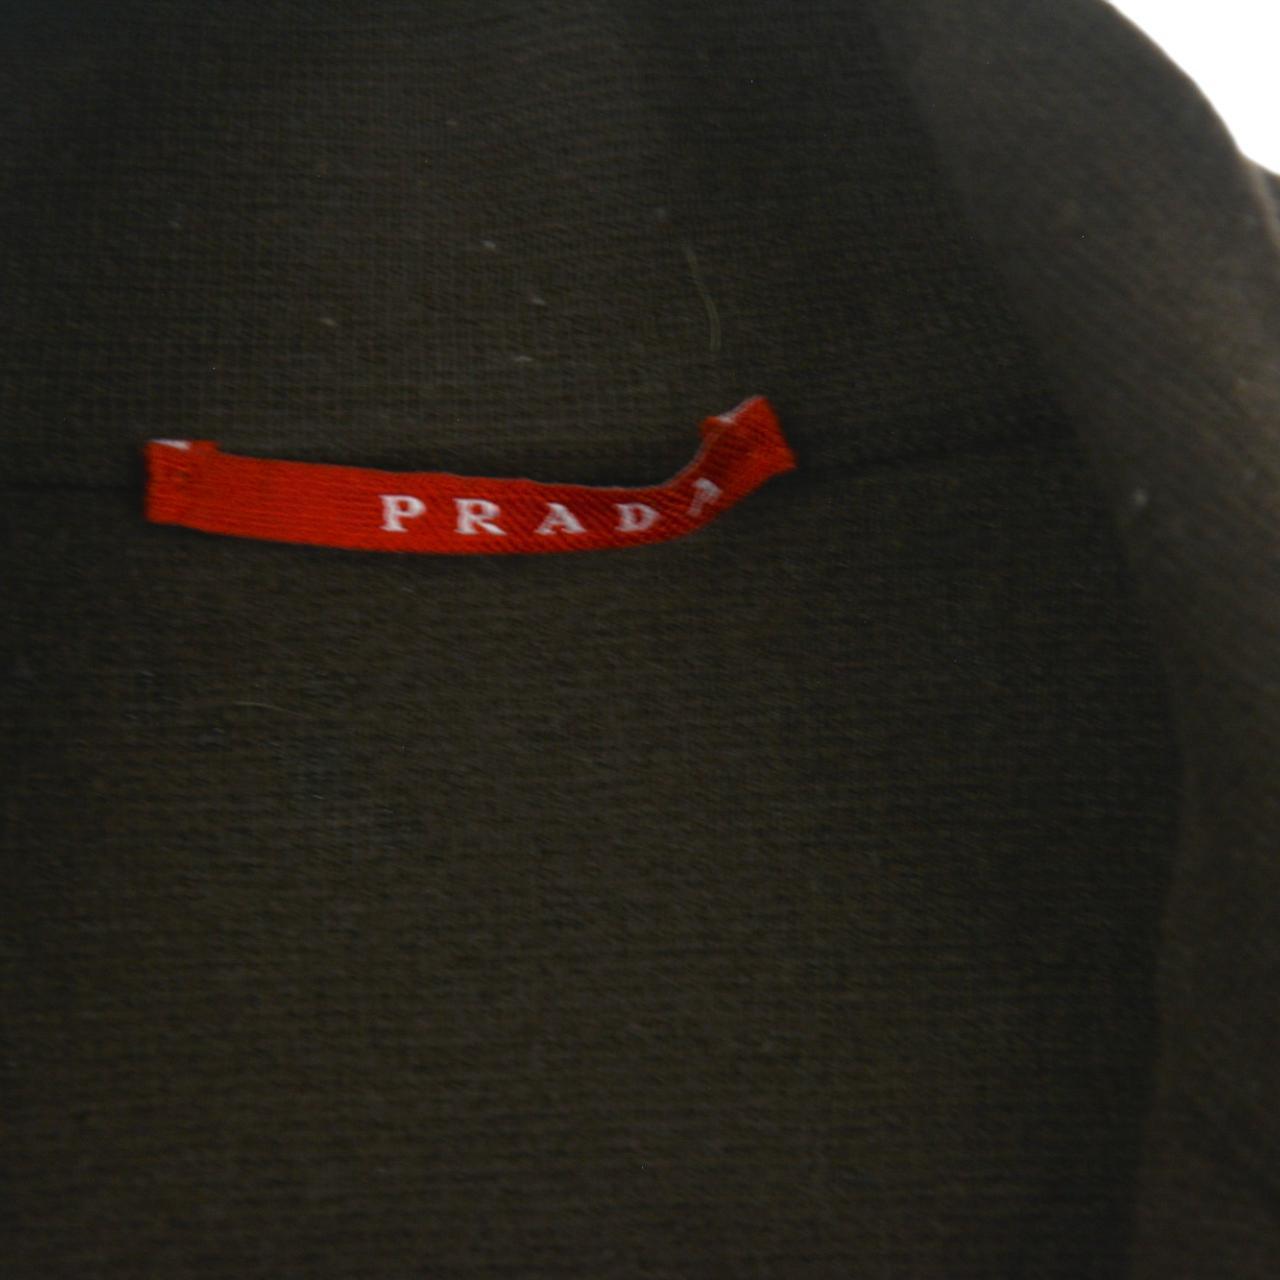 Vintage Prada Knitted Zip Up Jumper Woman’s Size S - Known Source